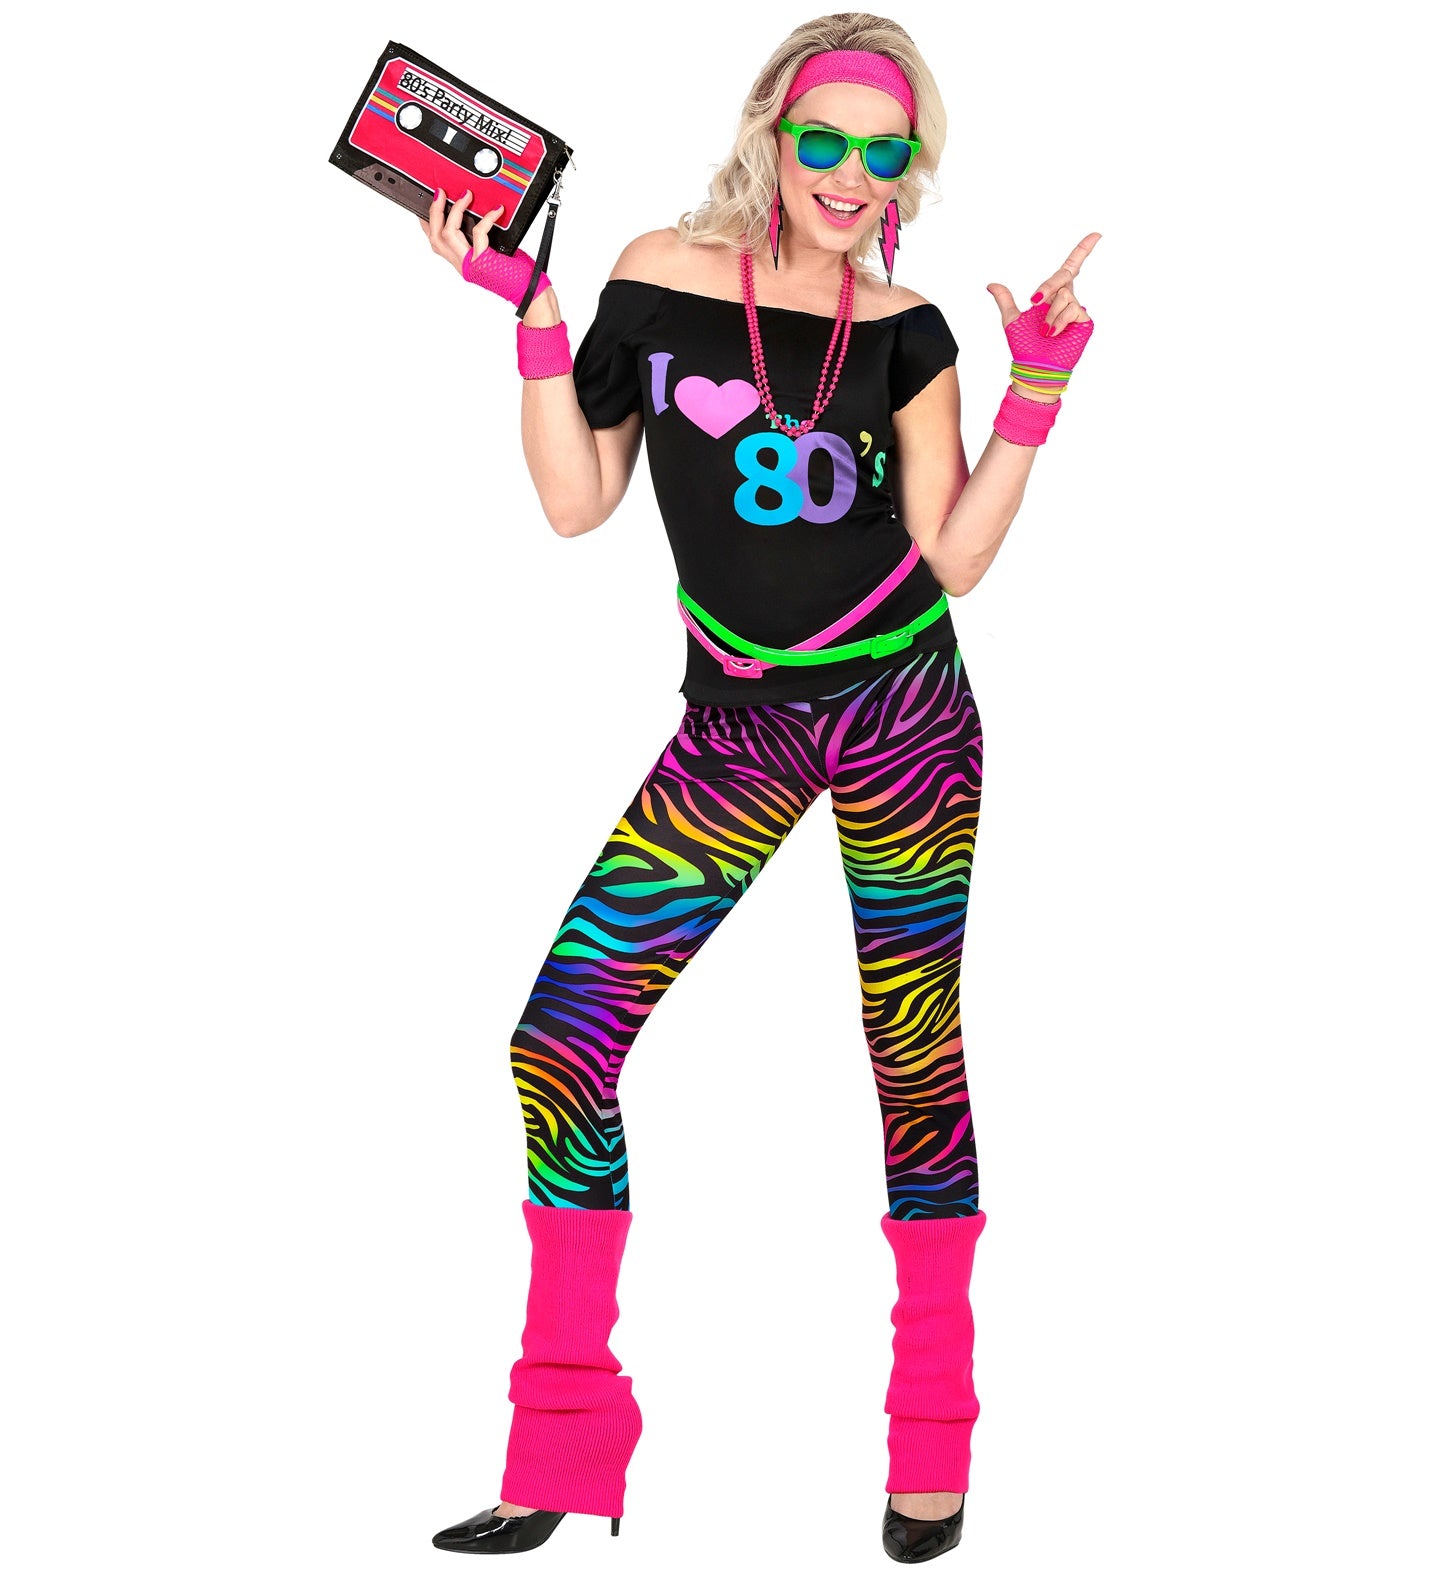  80s Outfit for Women Party, 1980s Decades Halloween Costumes  Accessories Leg Warmers I Love The 80s Clothes Shirts Shirt Leggings  Jewelry Headbands Tutu,4-L : Clothing, Shoes & Jewelry